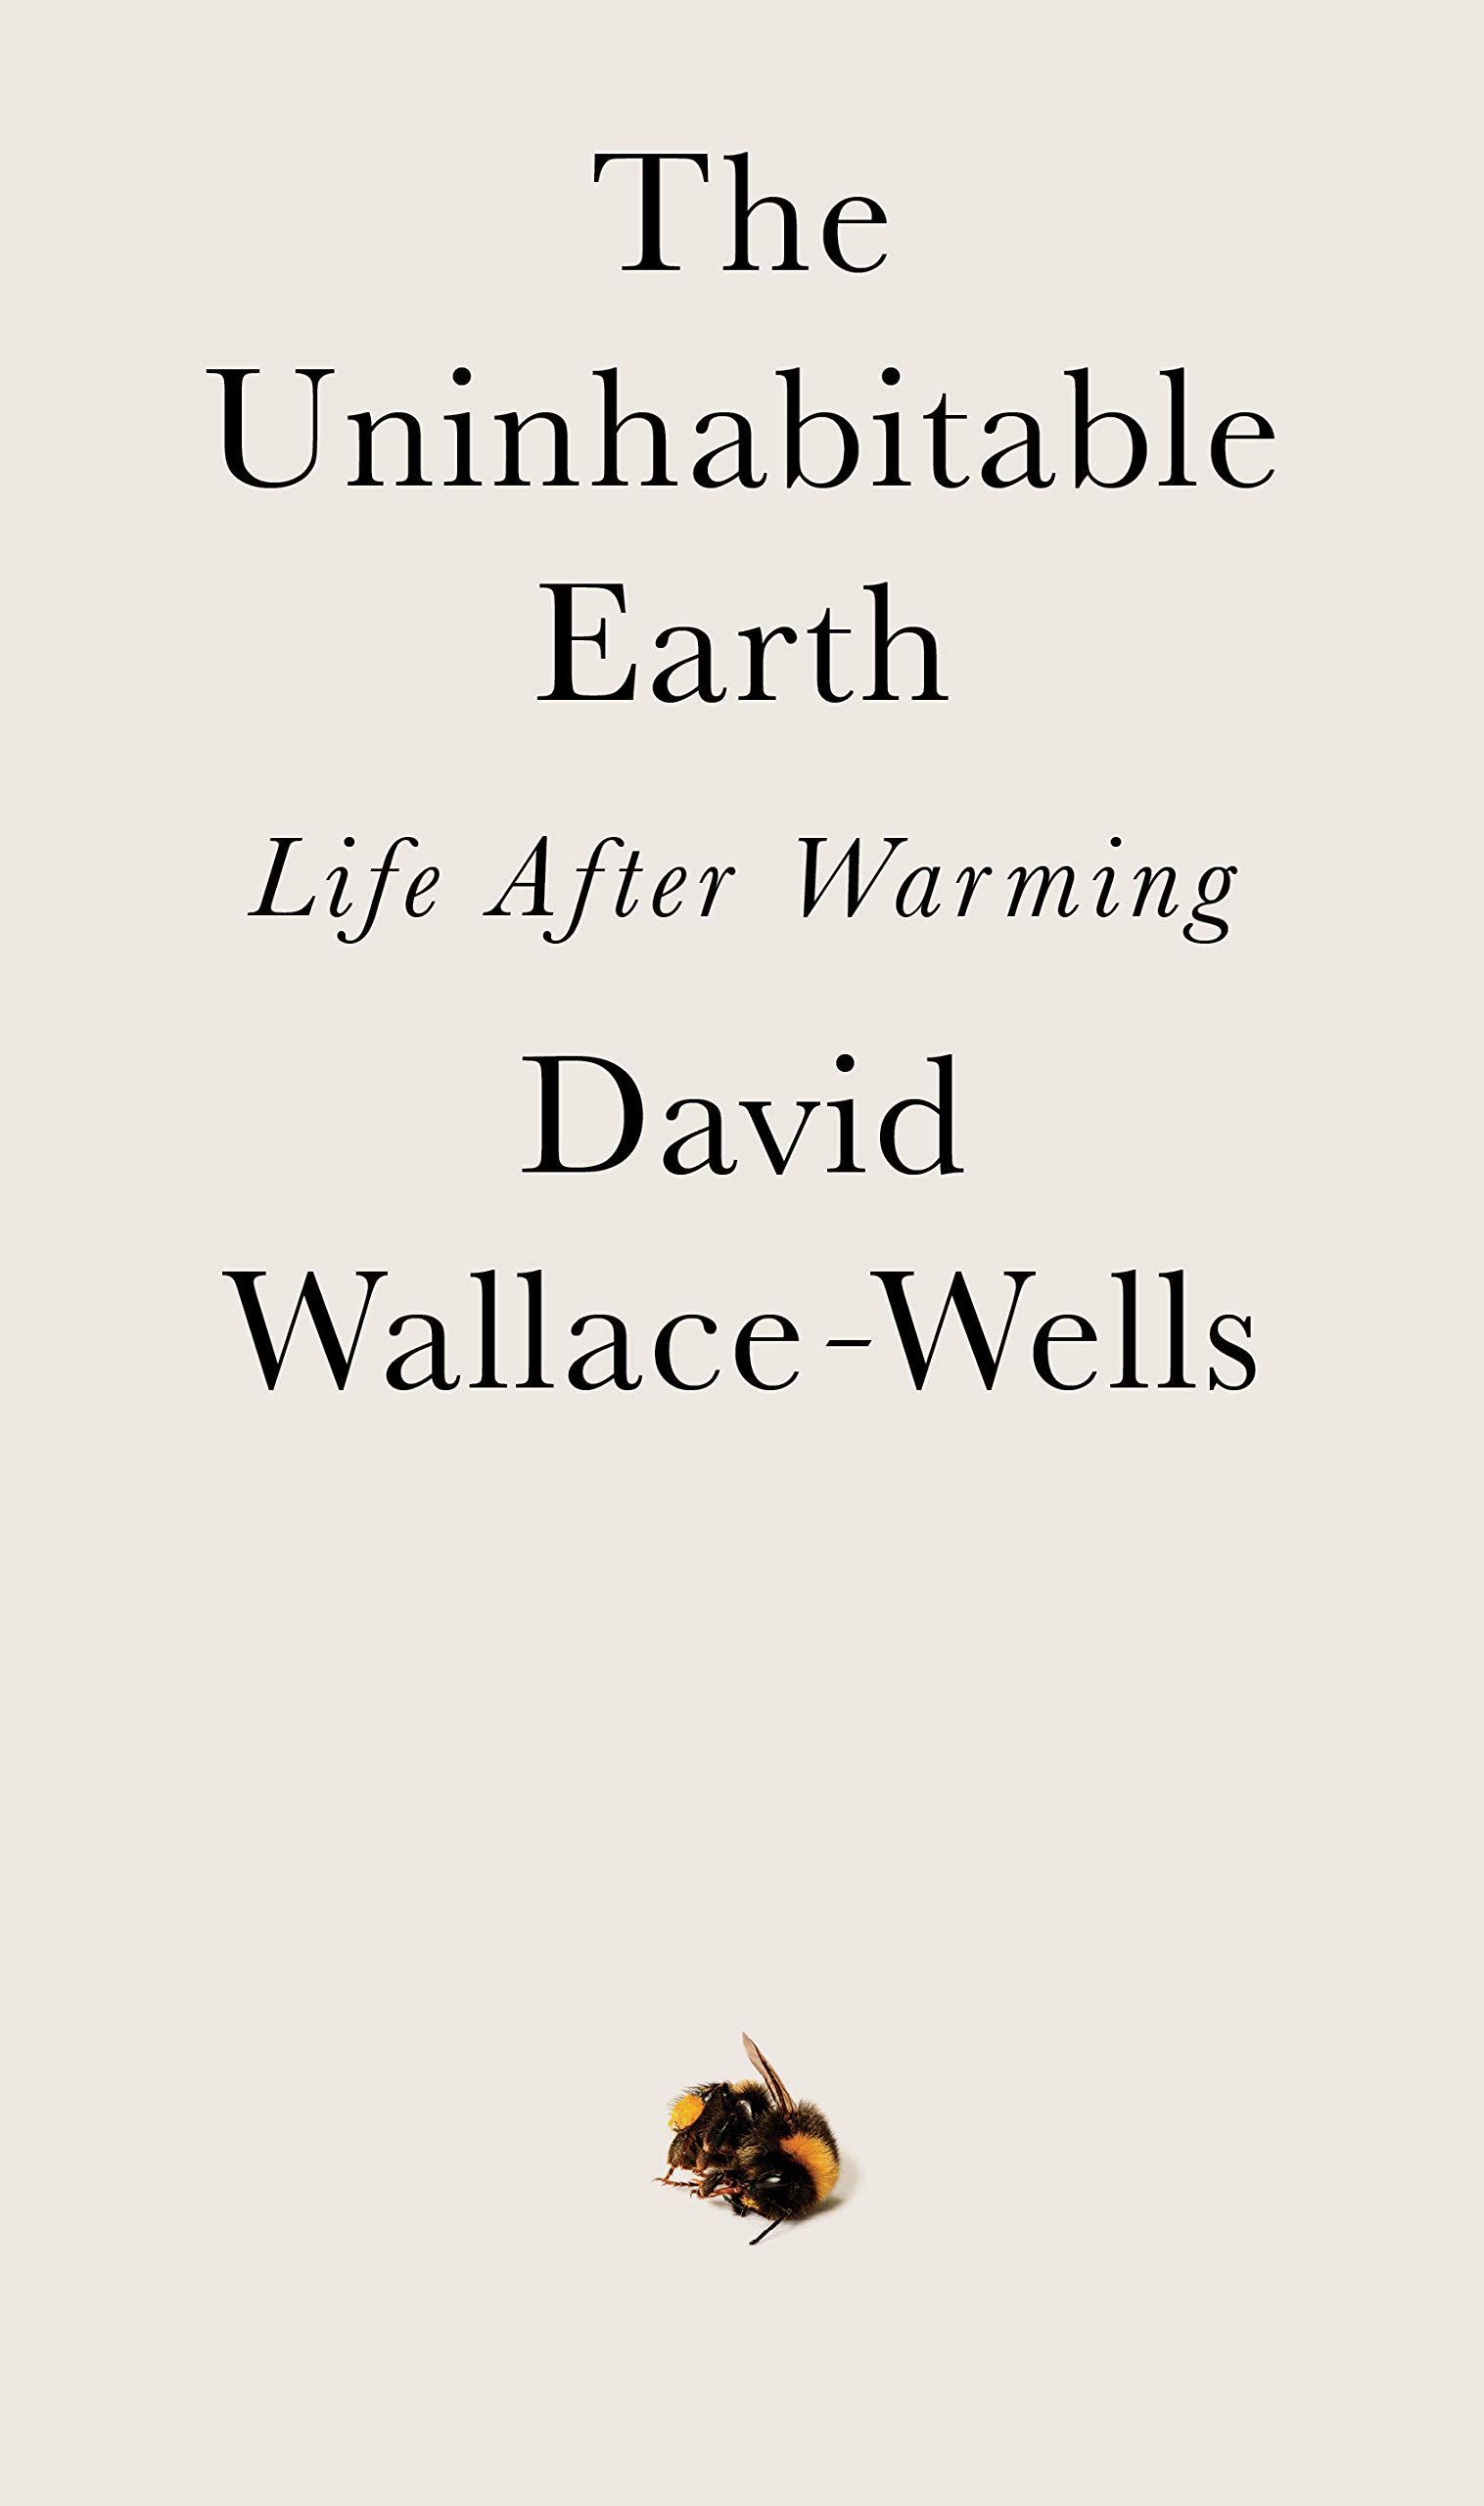 No Happy Ending: On Bill McKibben’s “Falter” and David Wallace-Wells’s “The Uninhabitable Earth”